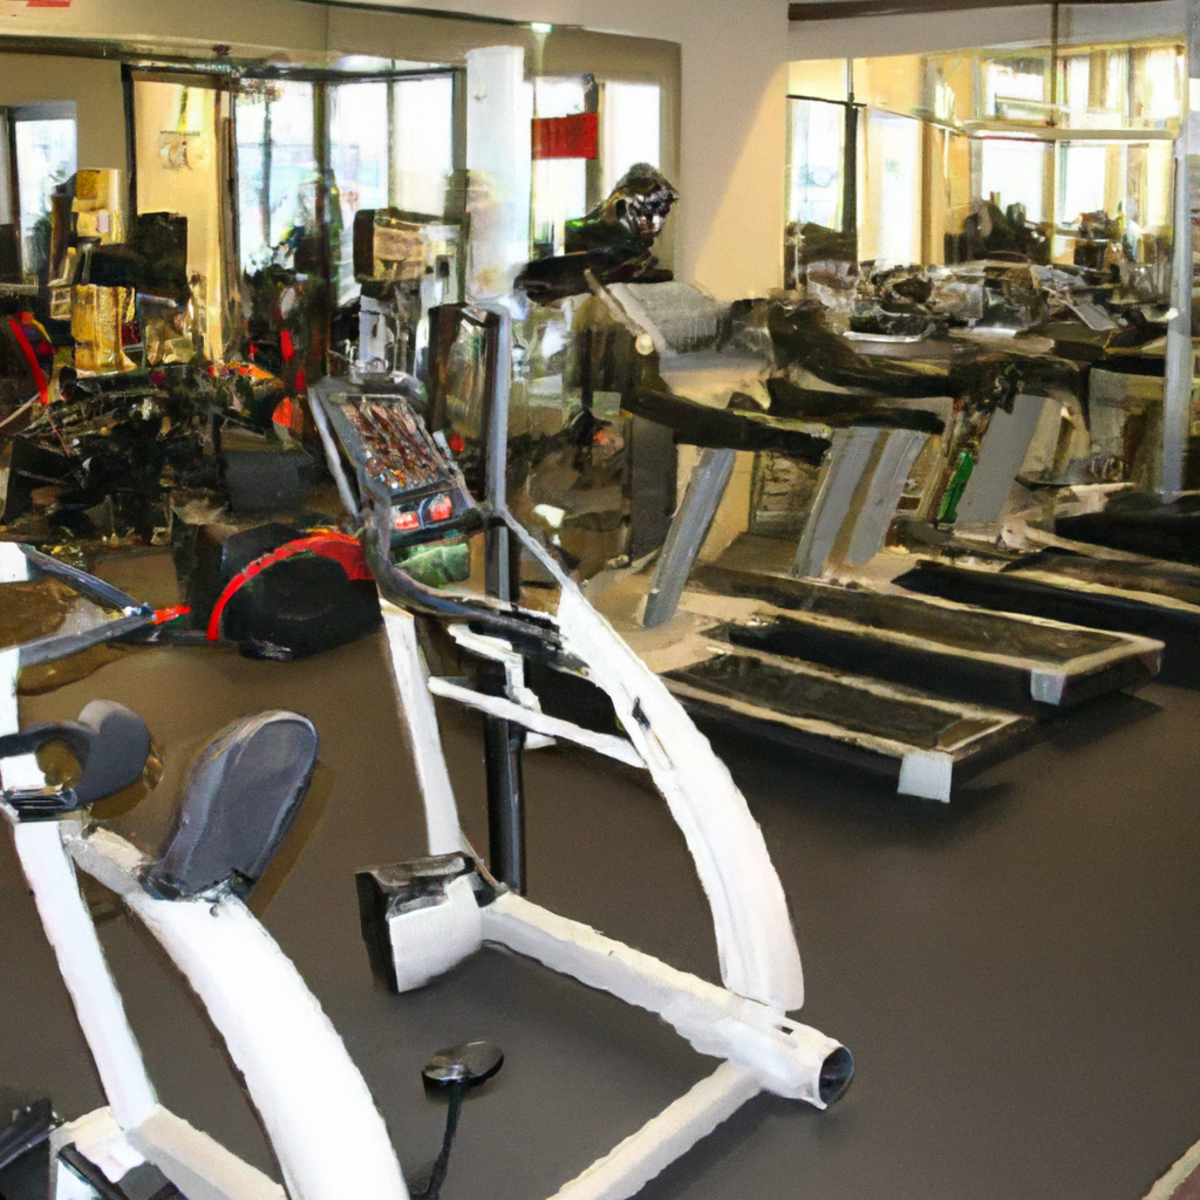 Vibrant gym with treadmills, weights, and bikes, promoting healthy and active lifestyle for athletes - Arrhythmogenic Right Ventricular Dysplasia (ARVD)